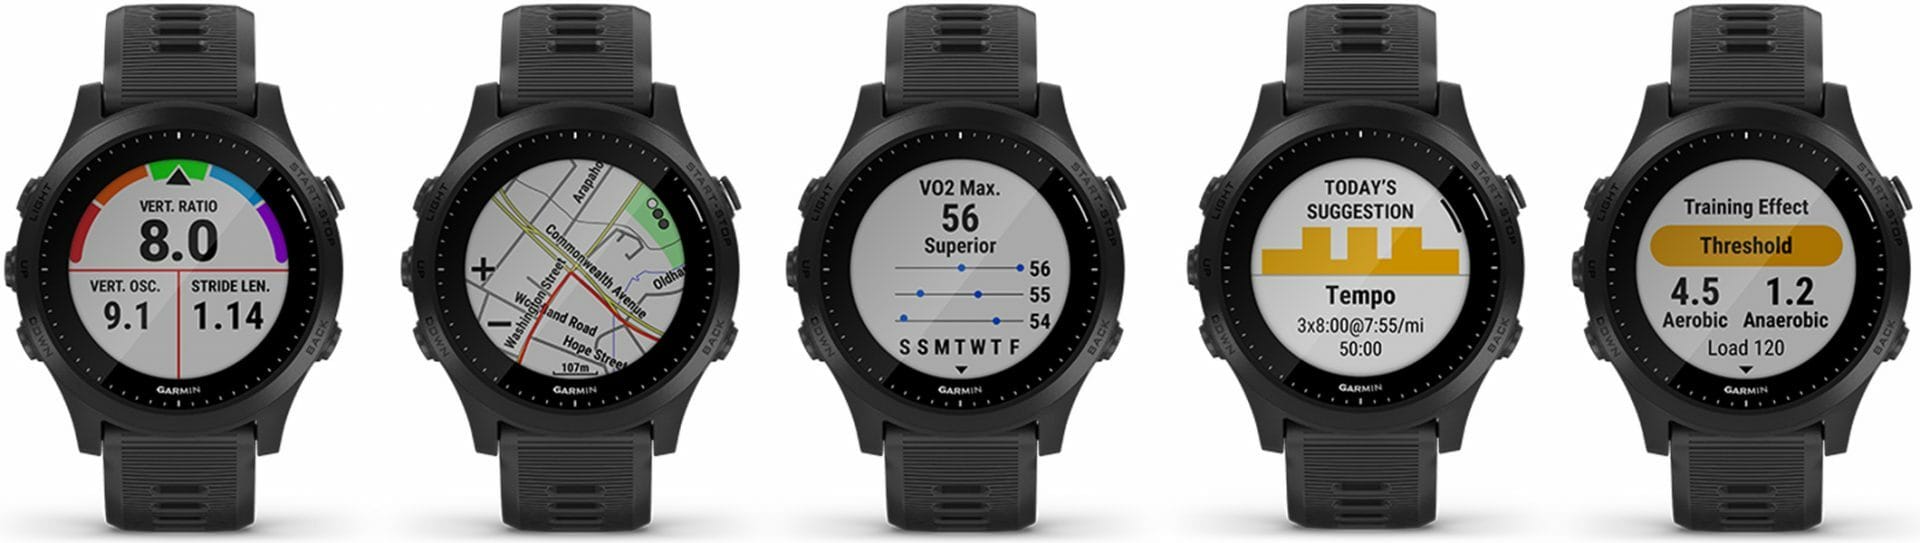 Is It Time For A GPS Watch? — Gear Guide